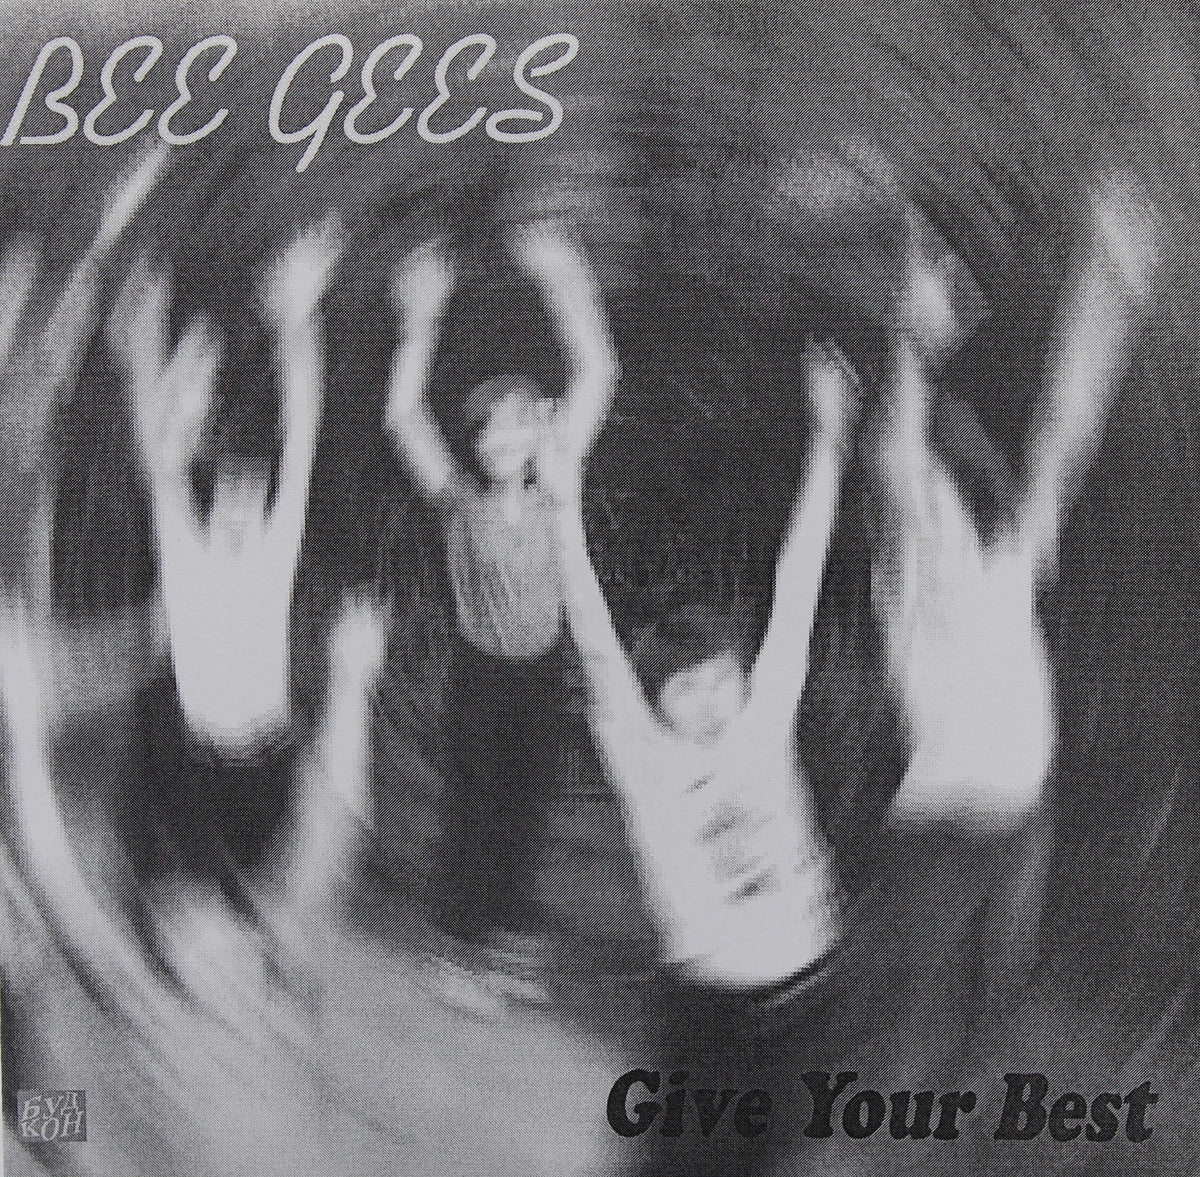 Bee Gees - Give Your Best, Flexi-disc, 5½&quot;, 45 RPM, Single Sided, Unofficial Release, Russia